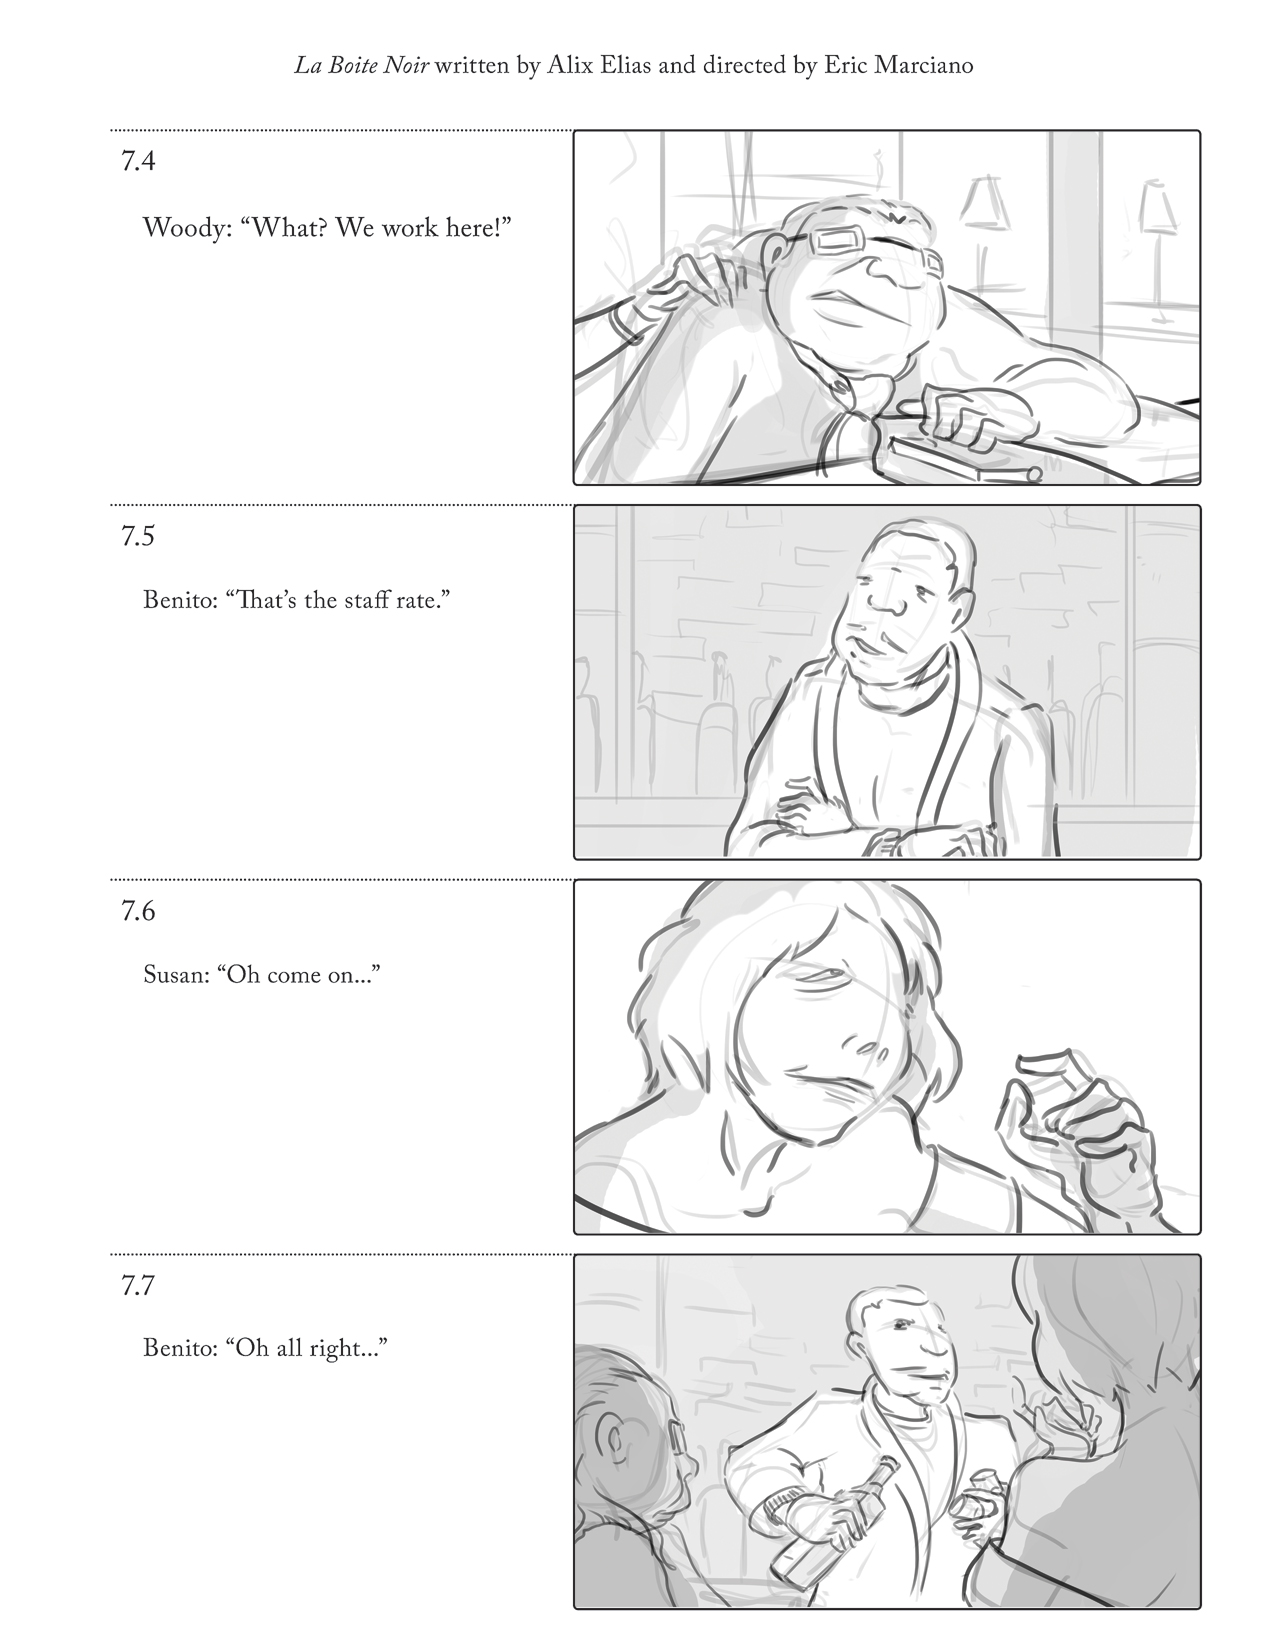 All-live-action-storyboards-with-new-vertical-format-7